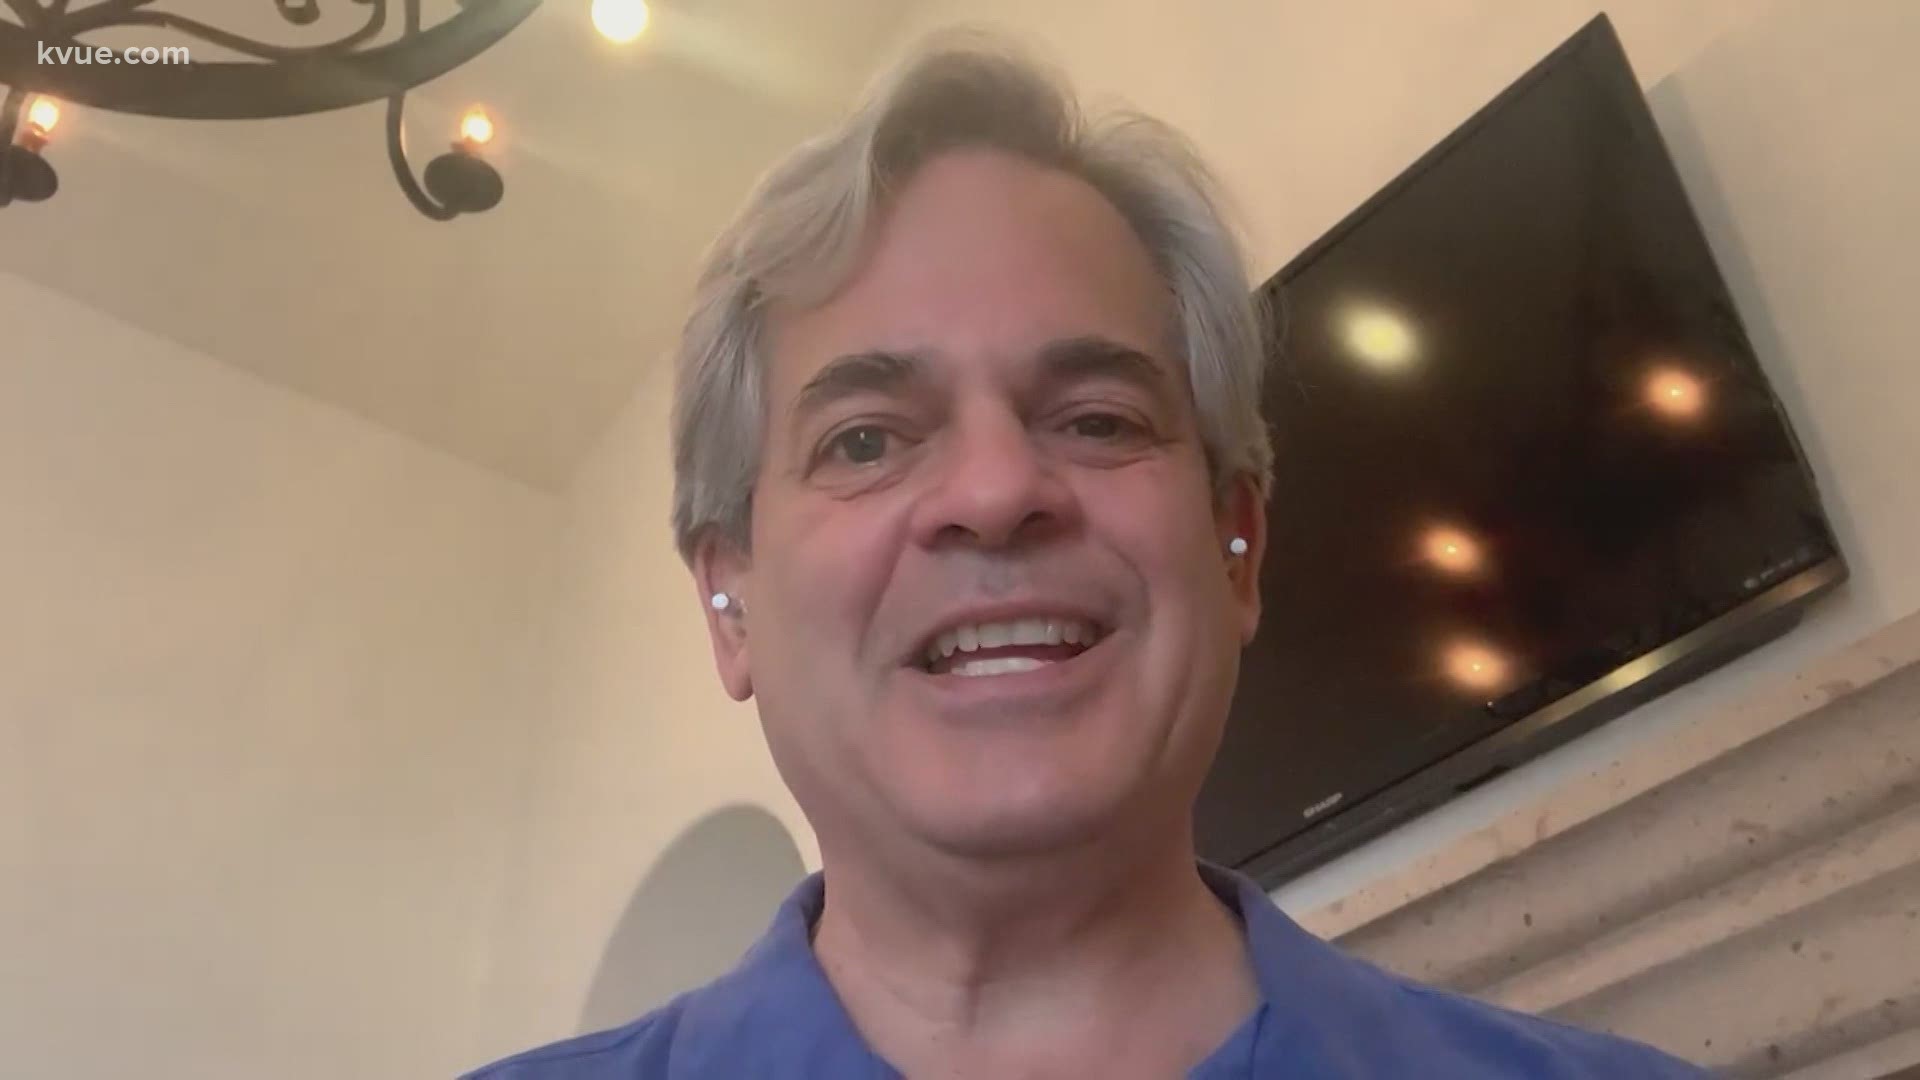 Austin Mayor Steve Adler has issued an apology for traveling to Mexico in November with a group of people after hosting his daughter's wedding.